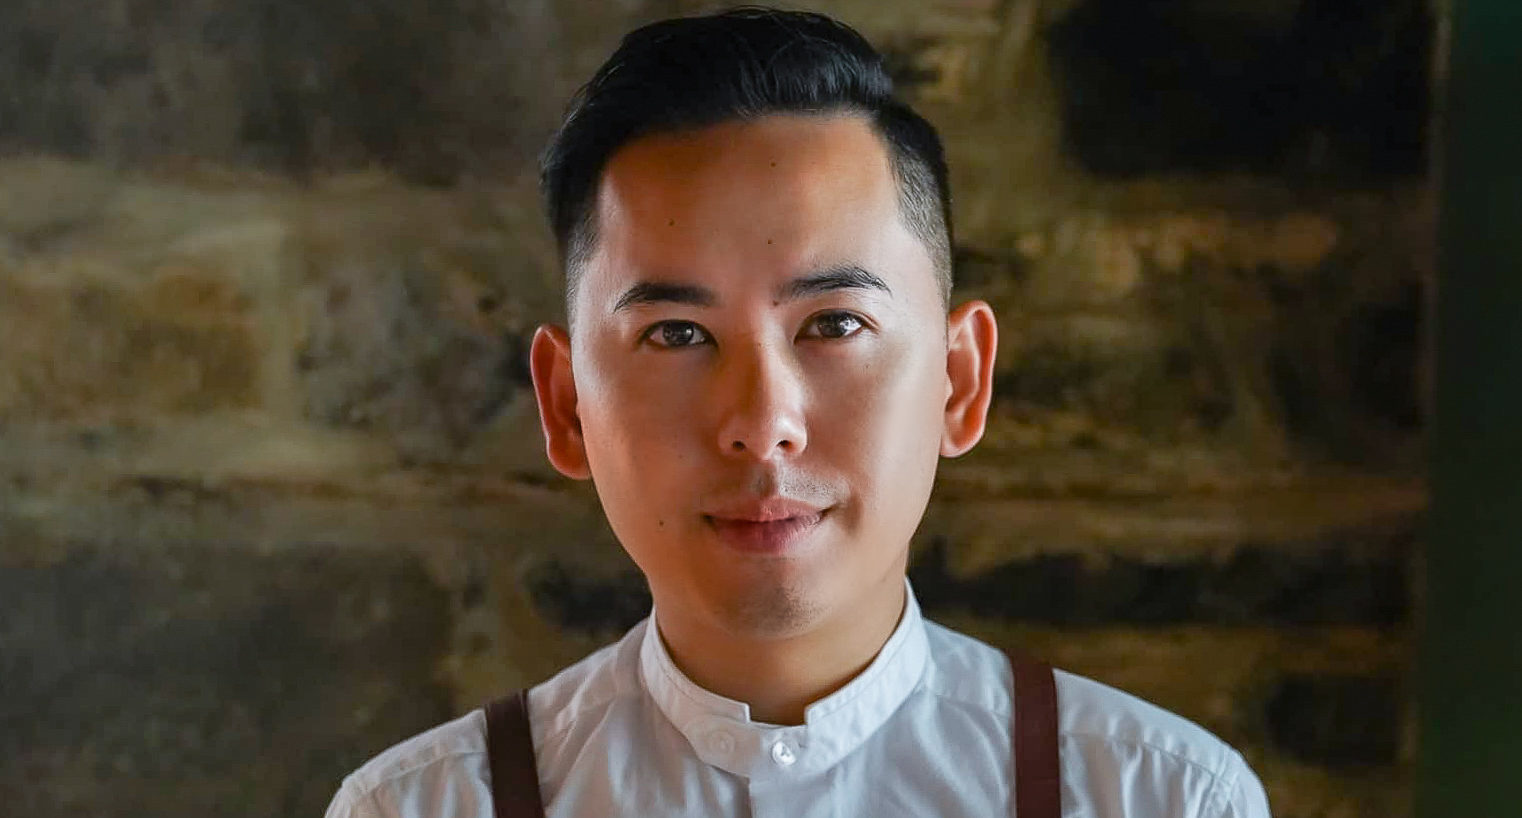 Montreal restaurateur Chanthy Yen is now Justin Trudeau’s personal chef